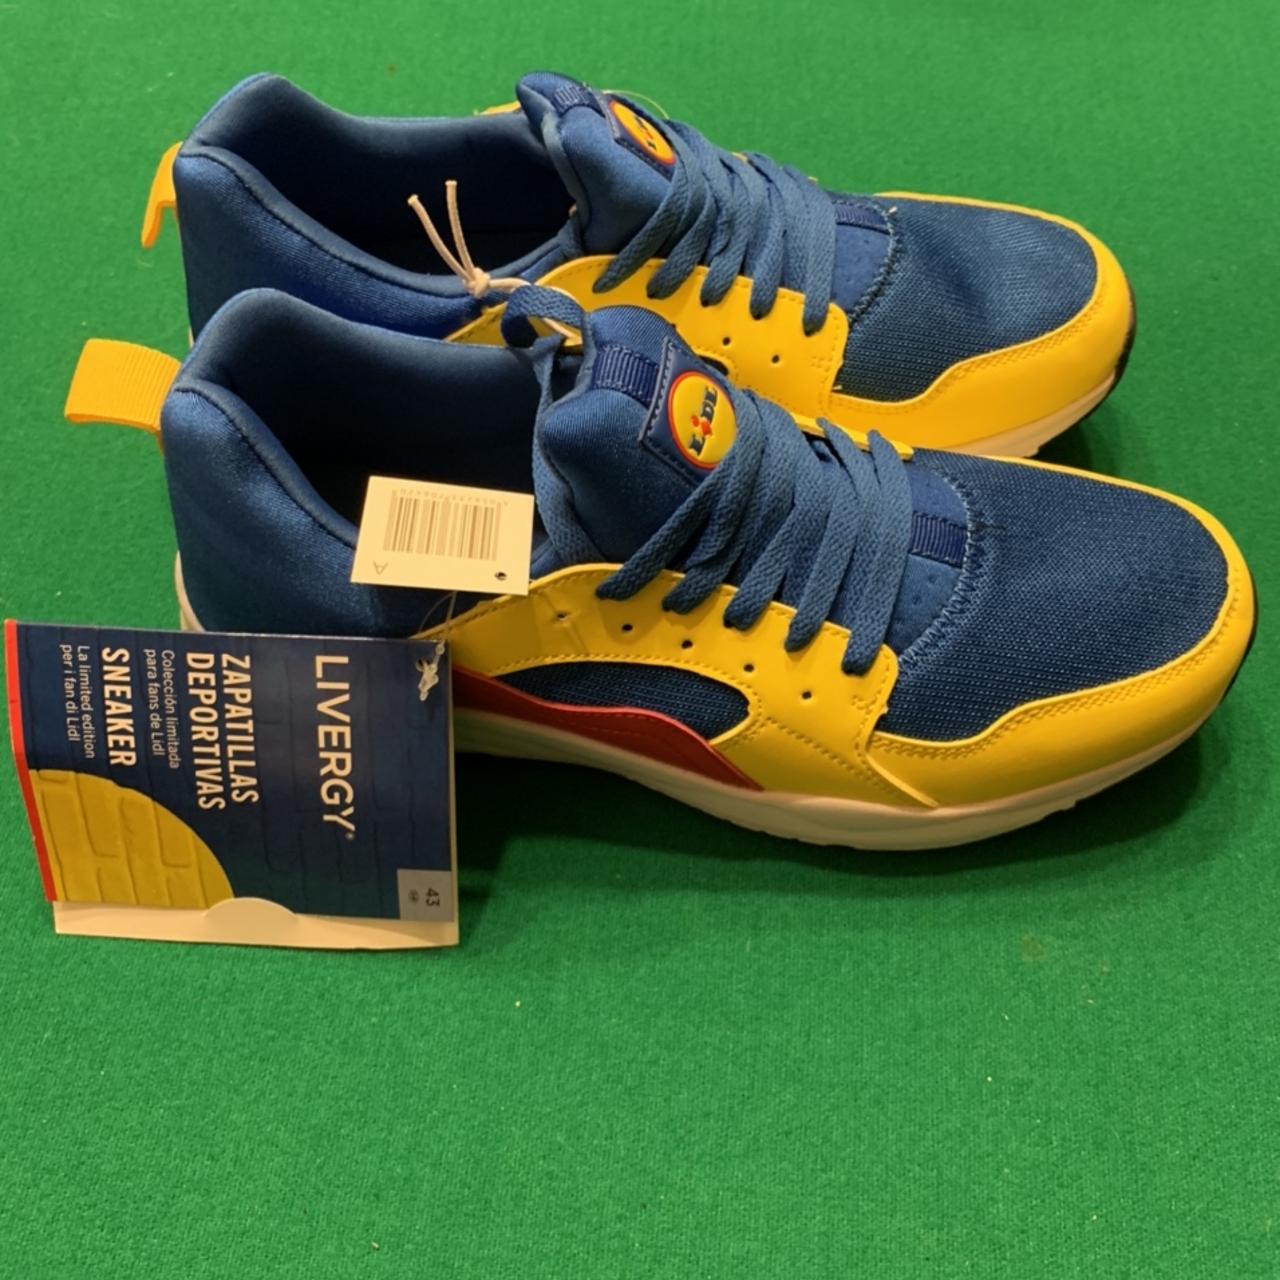 Lidl limited edition trainers 